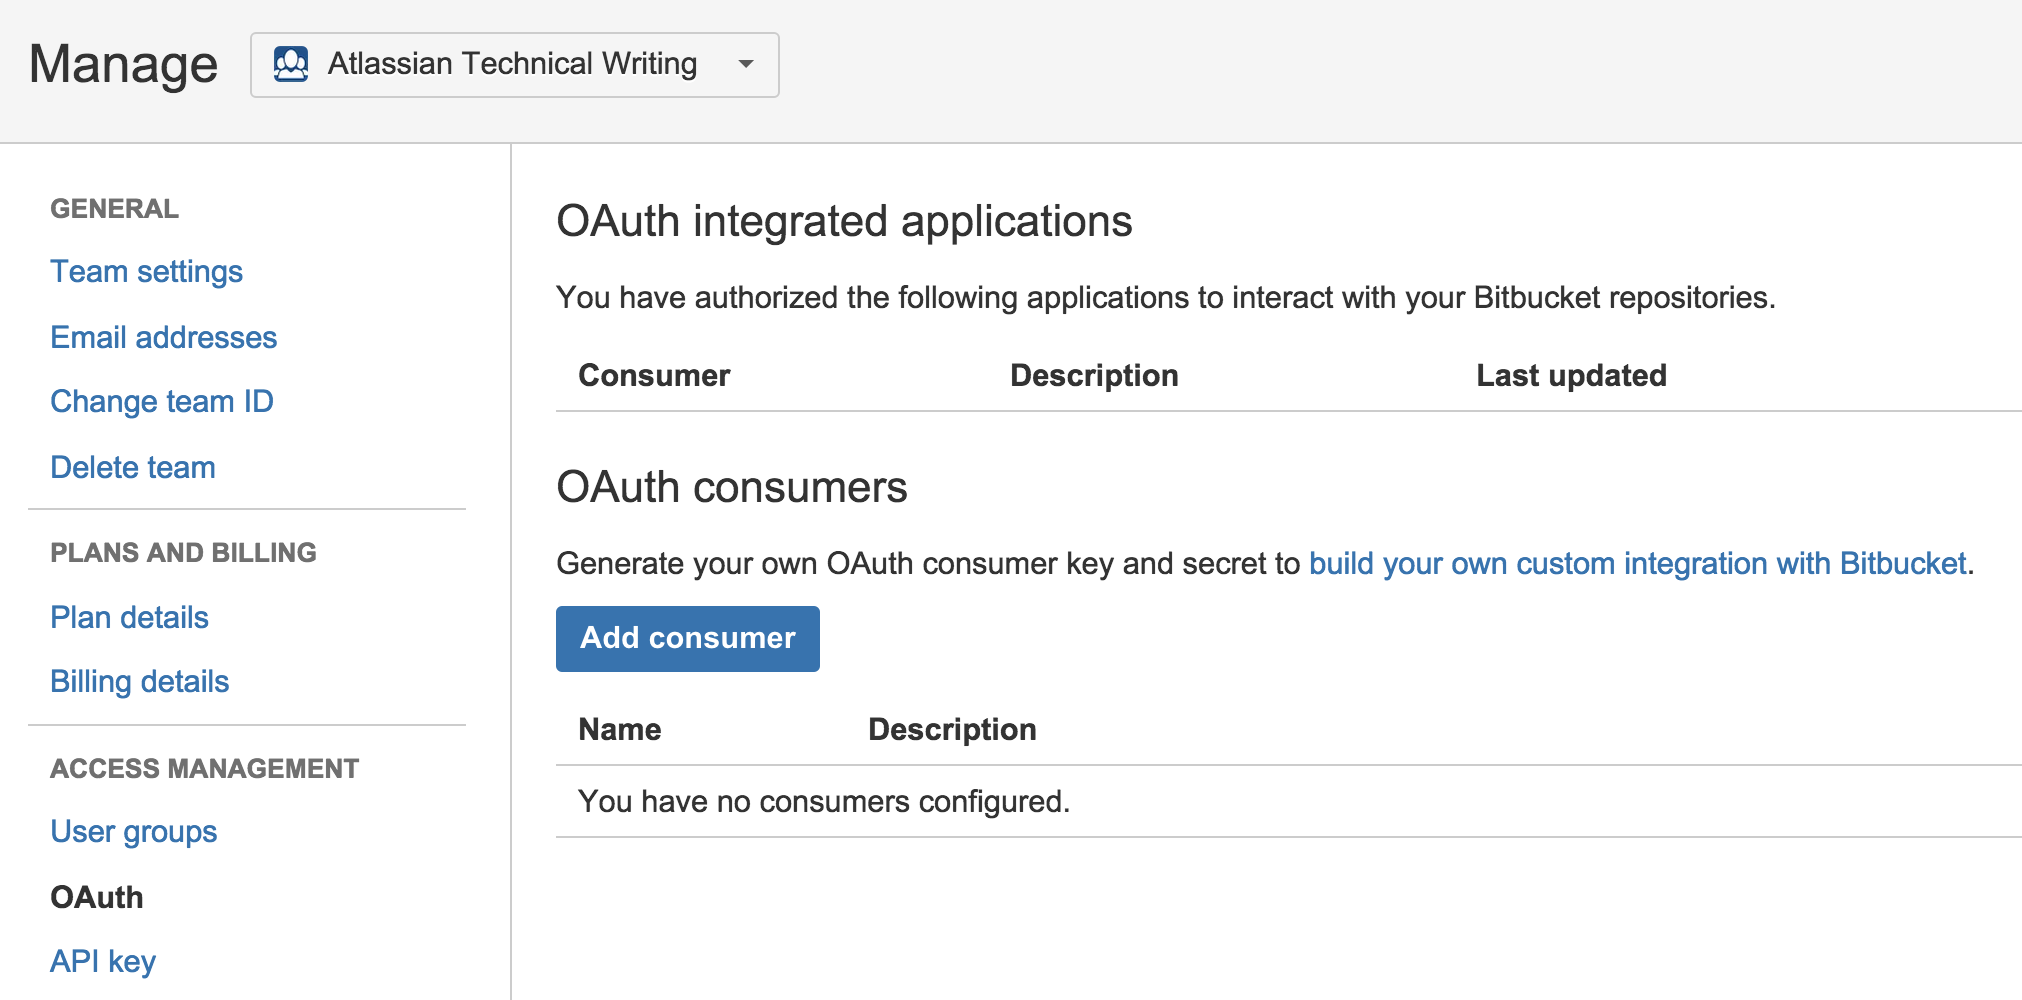 OAuth Integrated applications page.